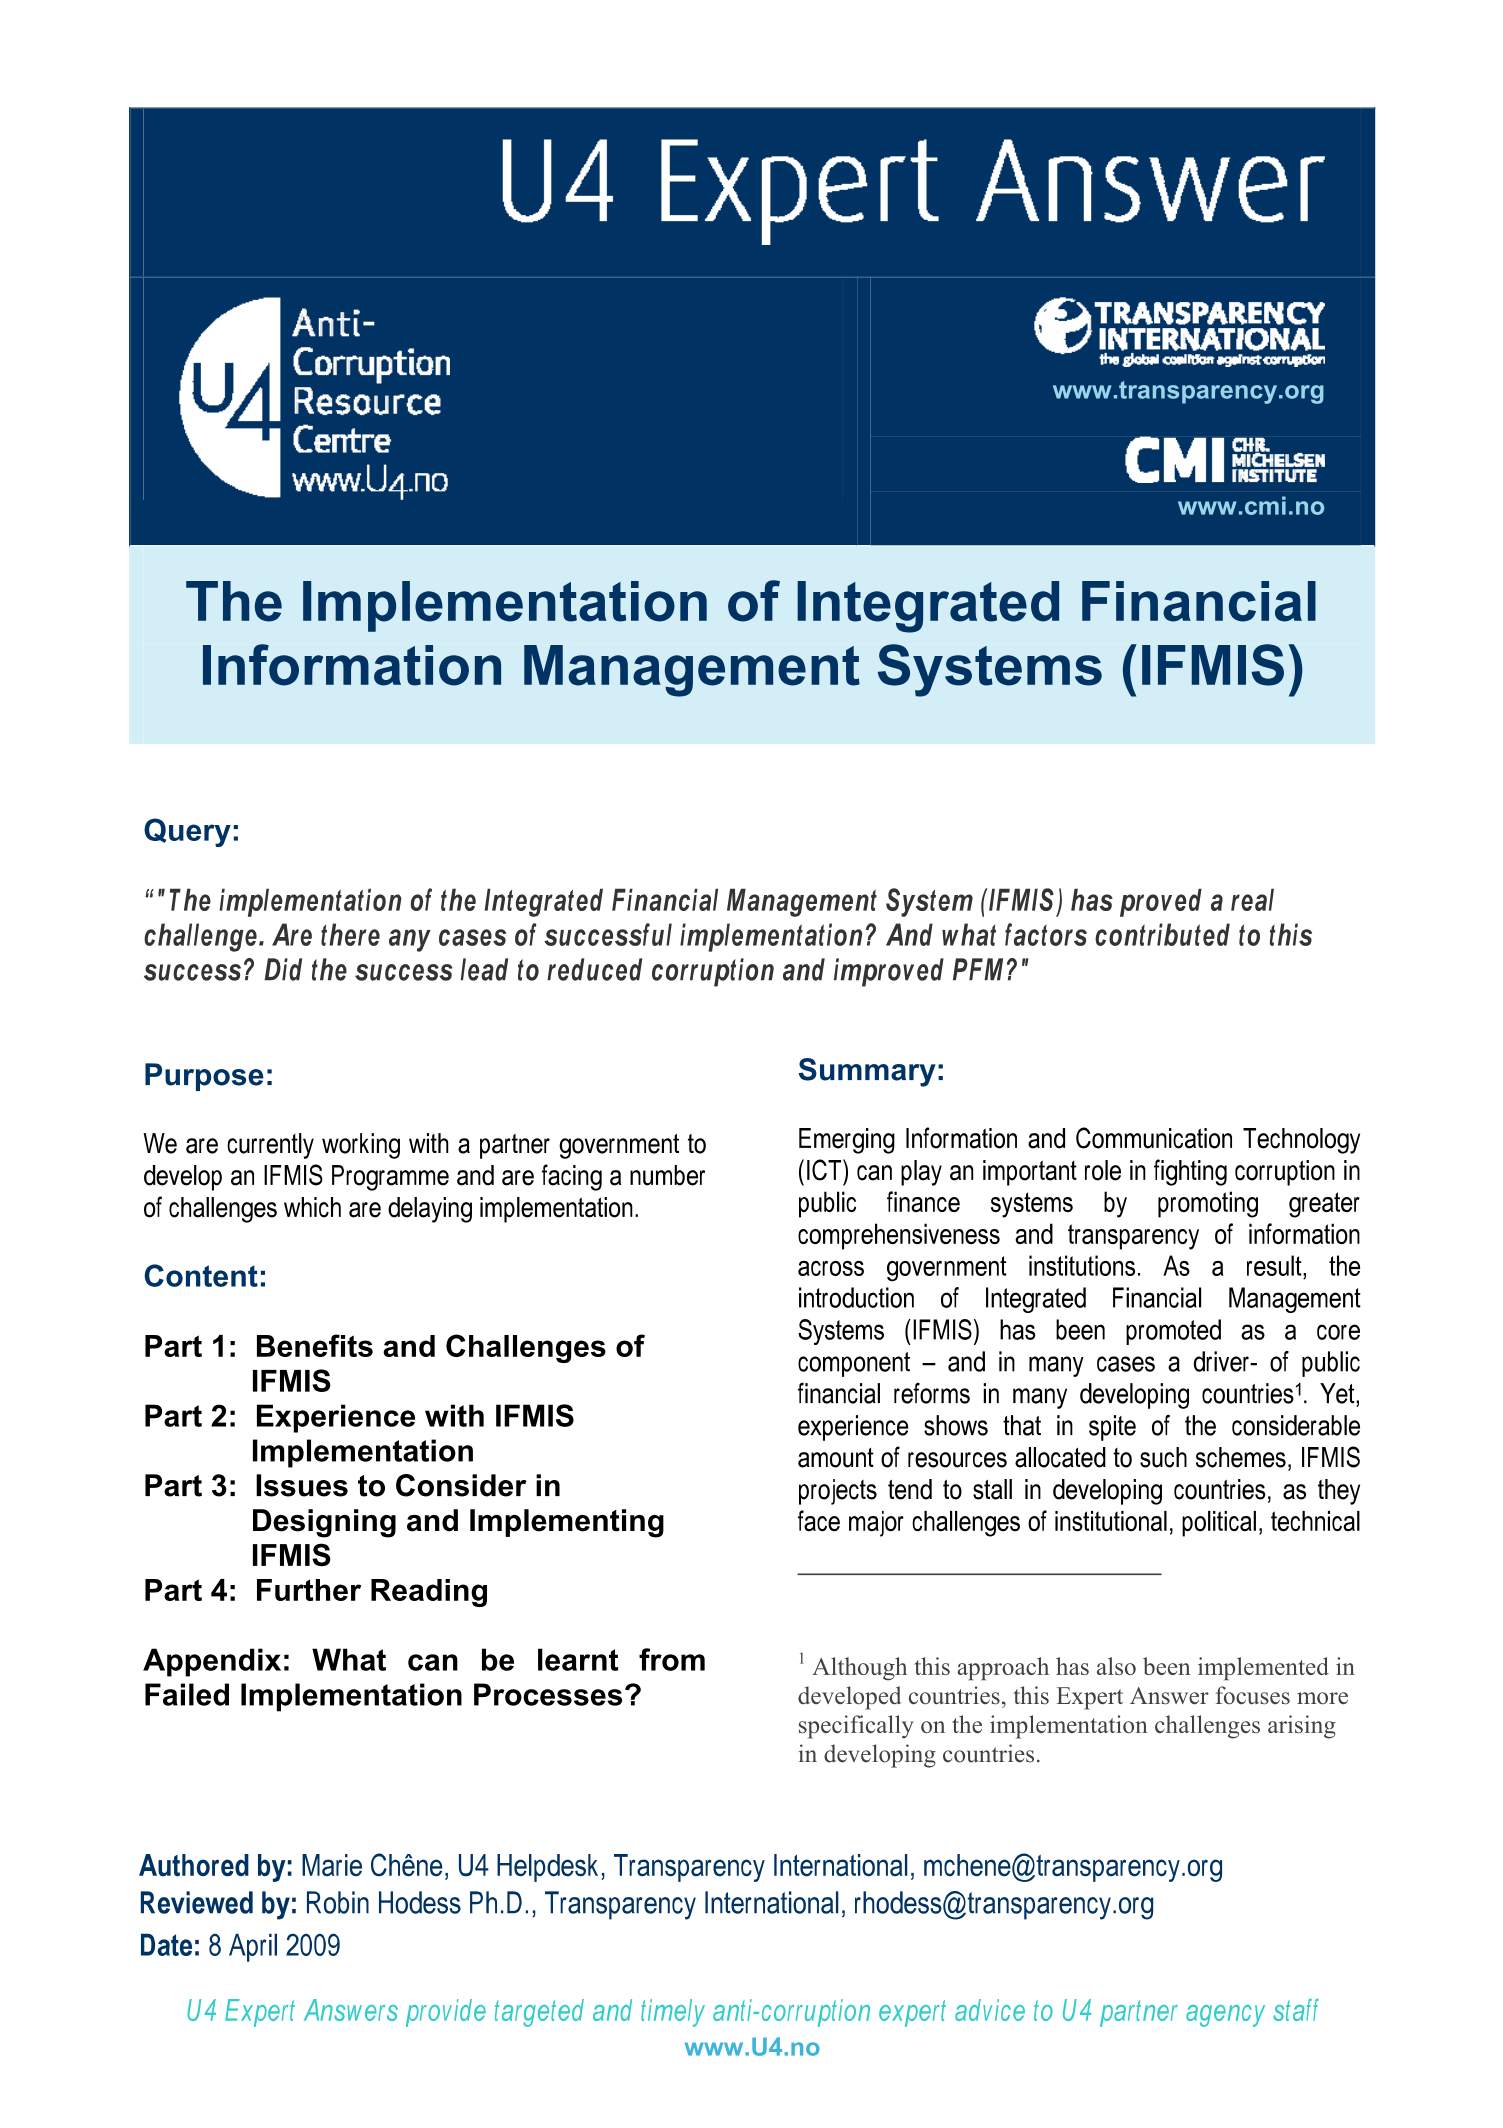 The implementation of Integrated Financial Management Systems (IFMIS)